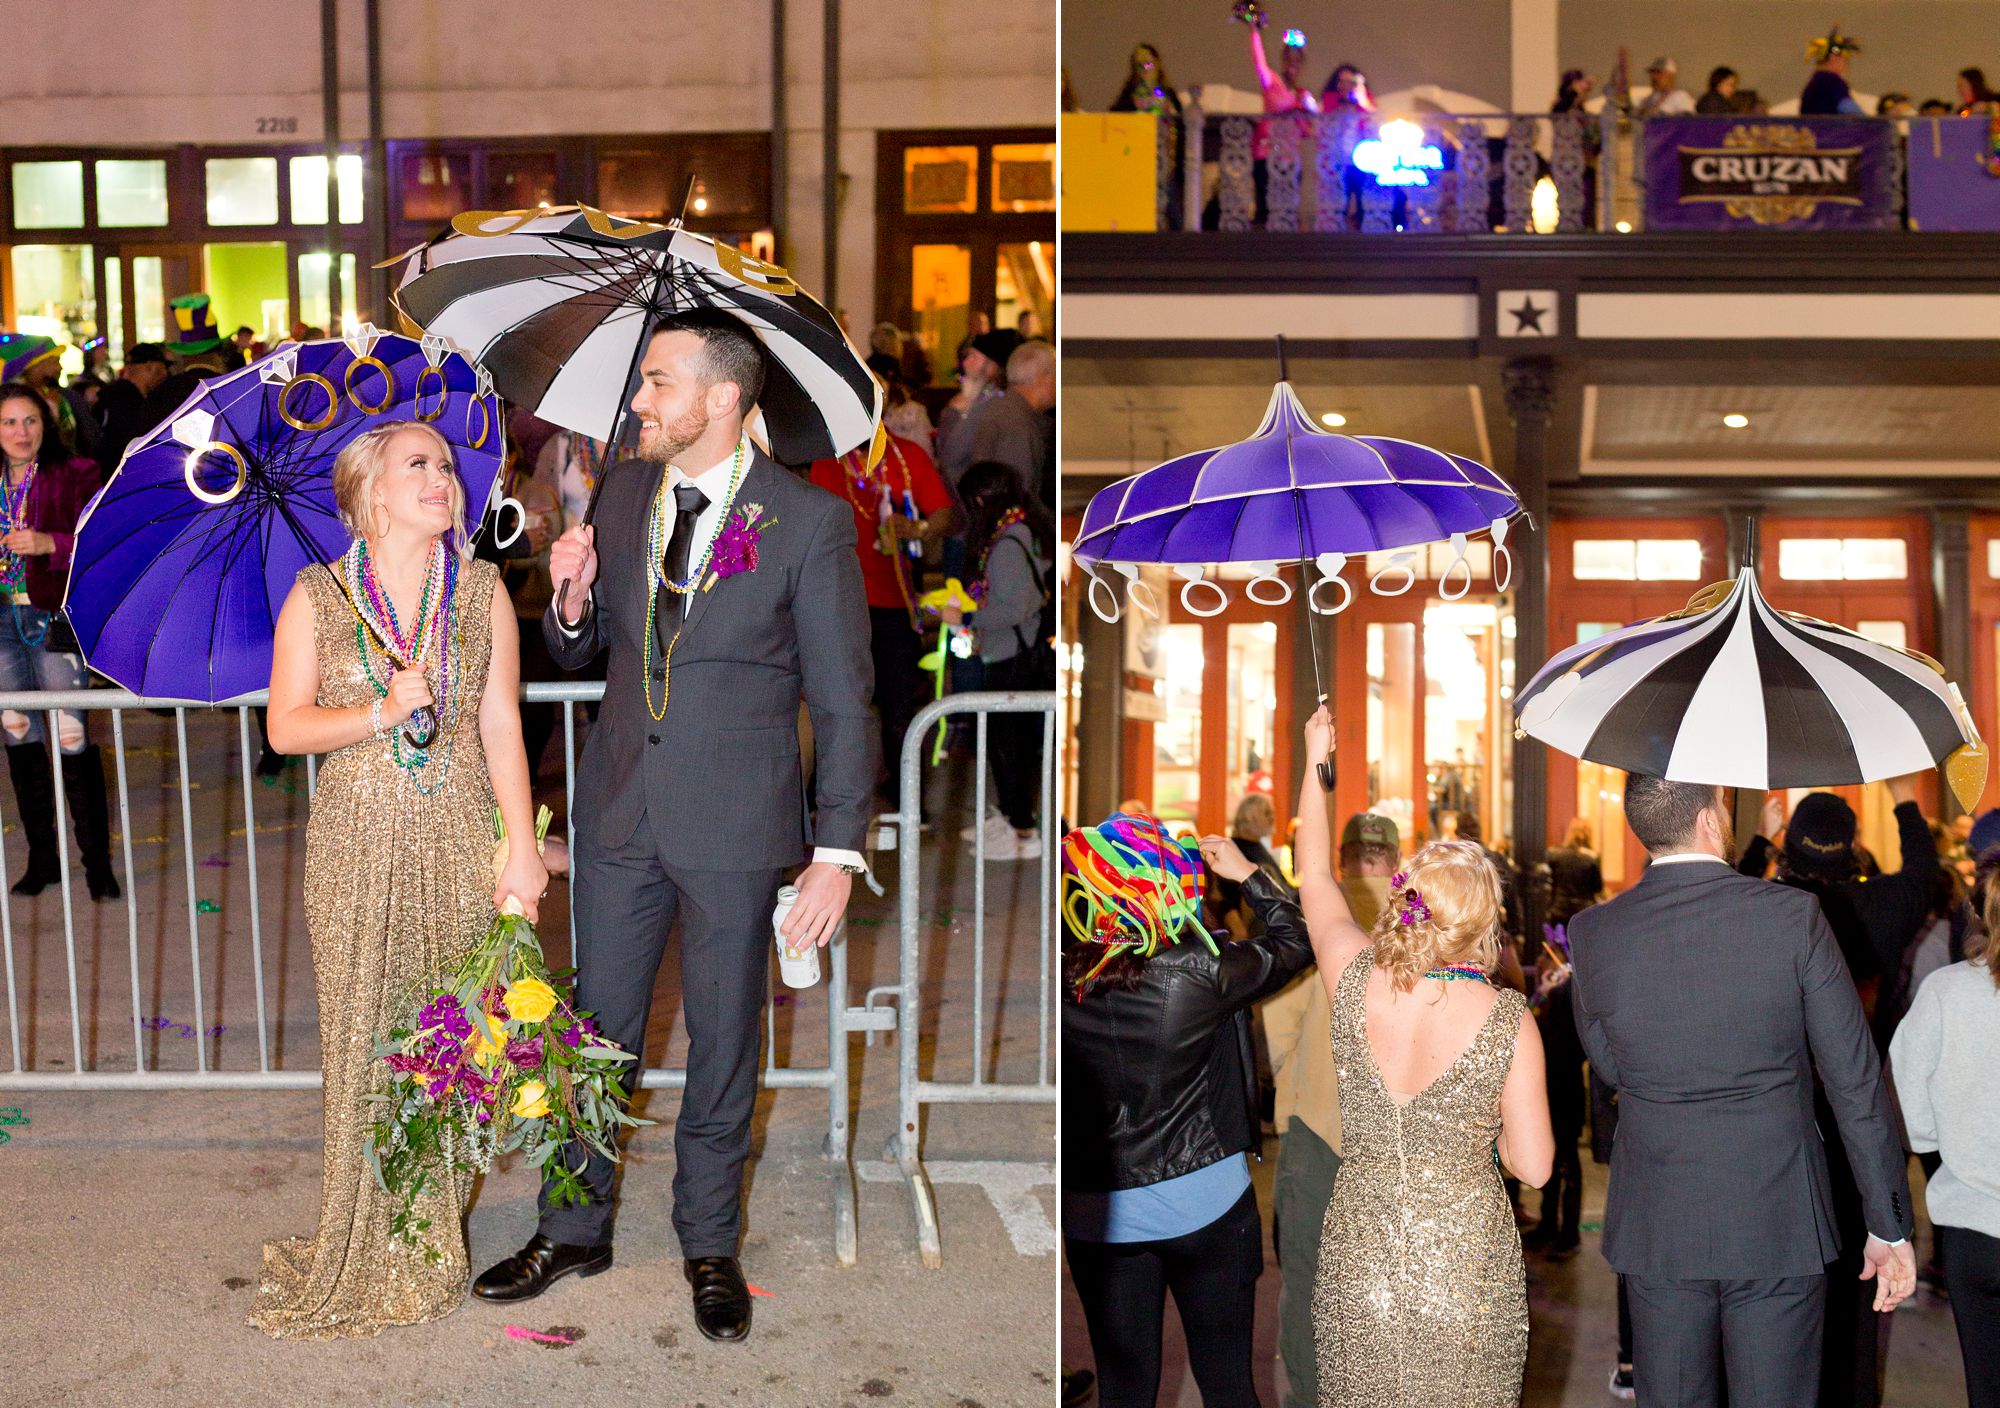 A bride and groom at their Mardi Gras elopement in Galveston, Texas.